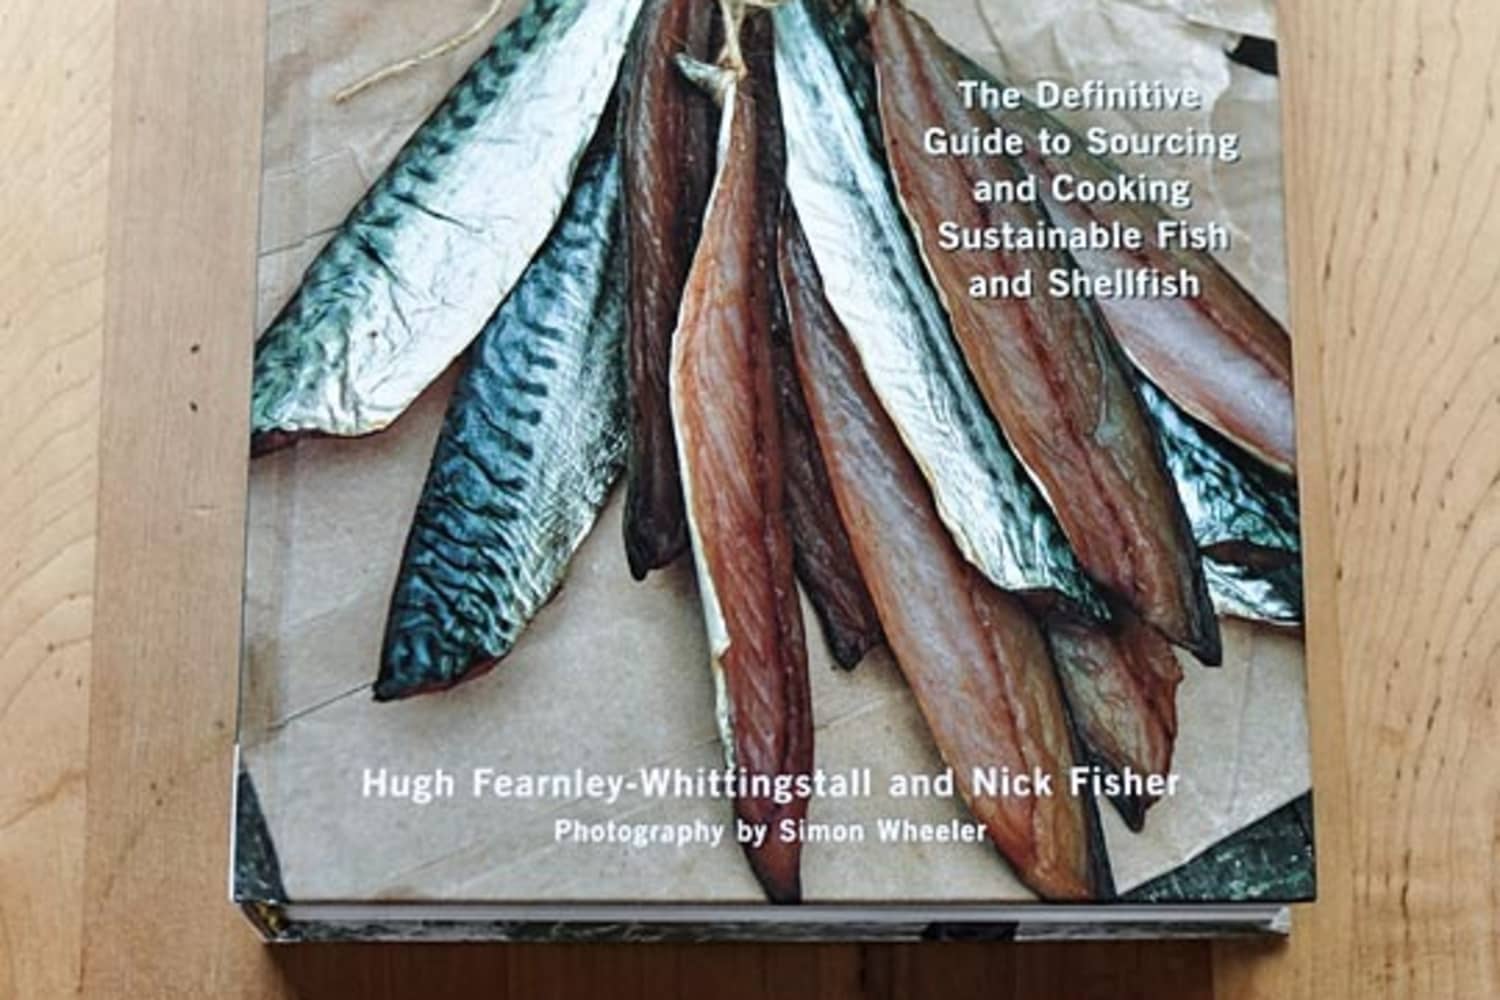 The River Cottage Fish Book: : Hugh Fearnley-Whittingstall